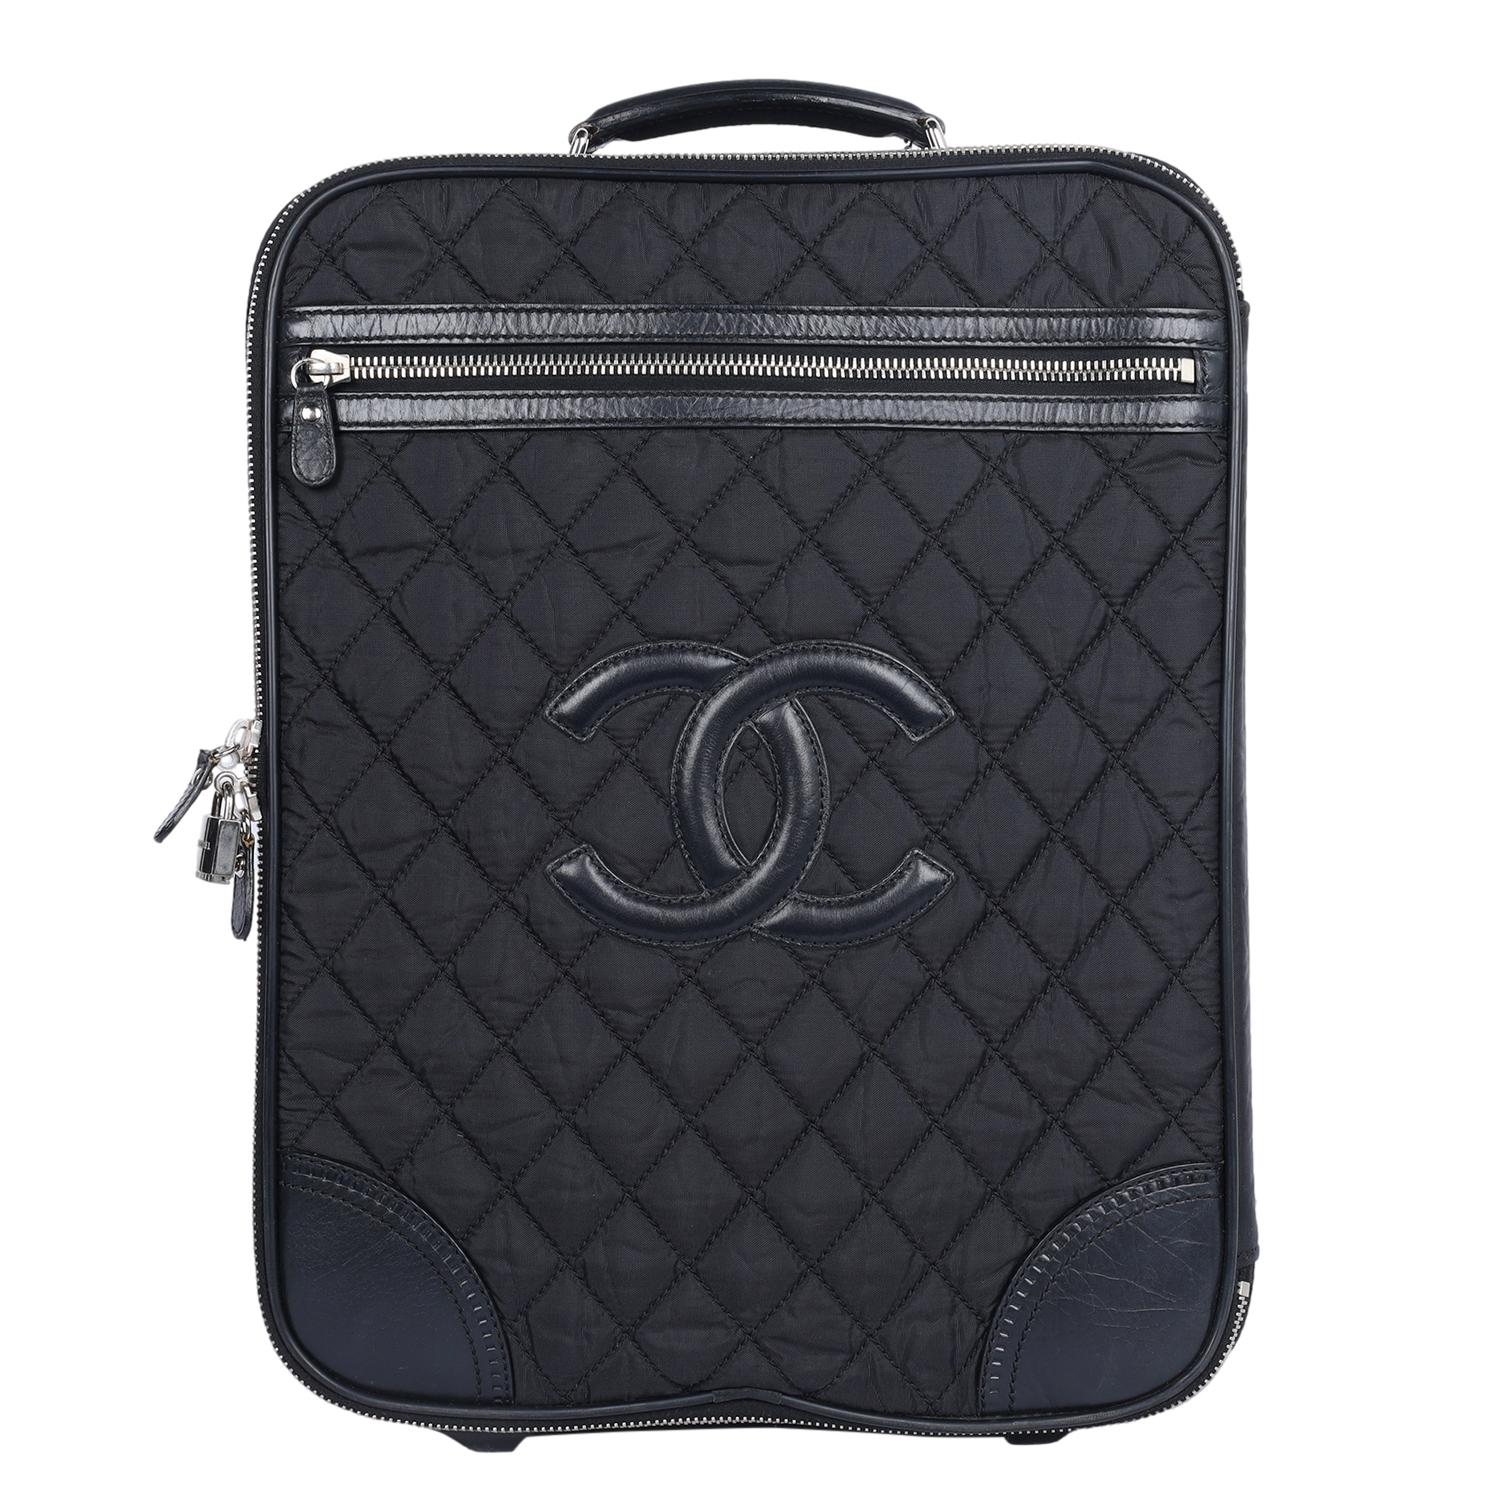 Authentic, pre-owned Chanel CC Rolling Trolley with Black Quilted Nylon and Leather accents. The main area is secured with a dual zipper closure with padlock,  silver hardware, front zipper pocket, top handle side handle, large interior with straps